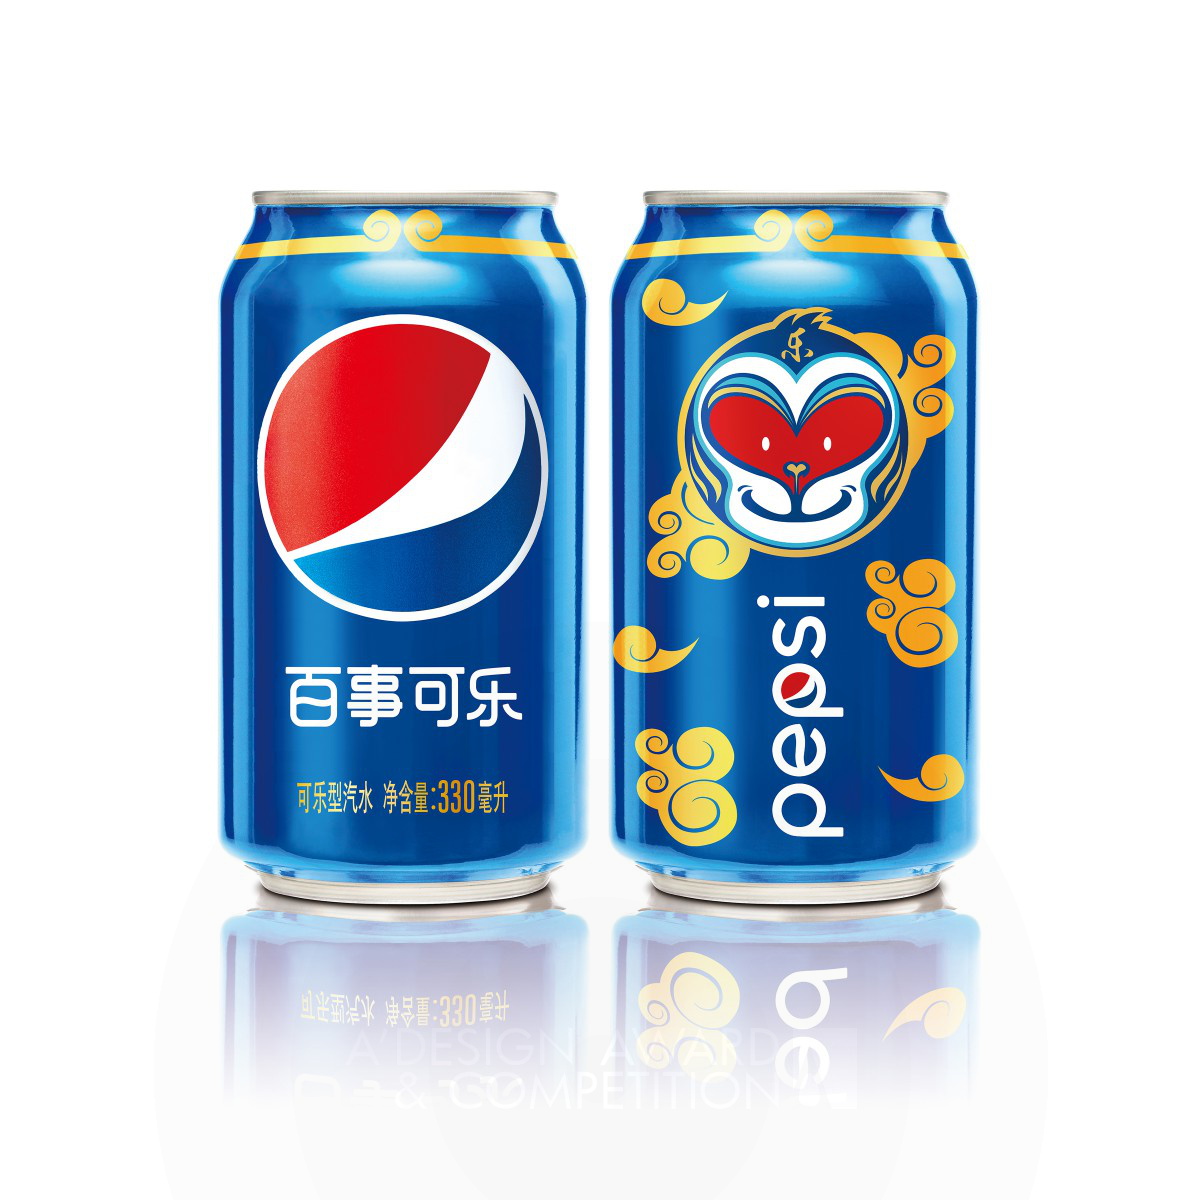 Pepsi Year of the Monkey Ltd Edition Can Aluminum Can by PepsiCo Design and Innovation Bronze Packaging Design Award Winner 2017 